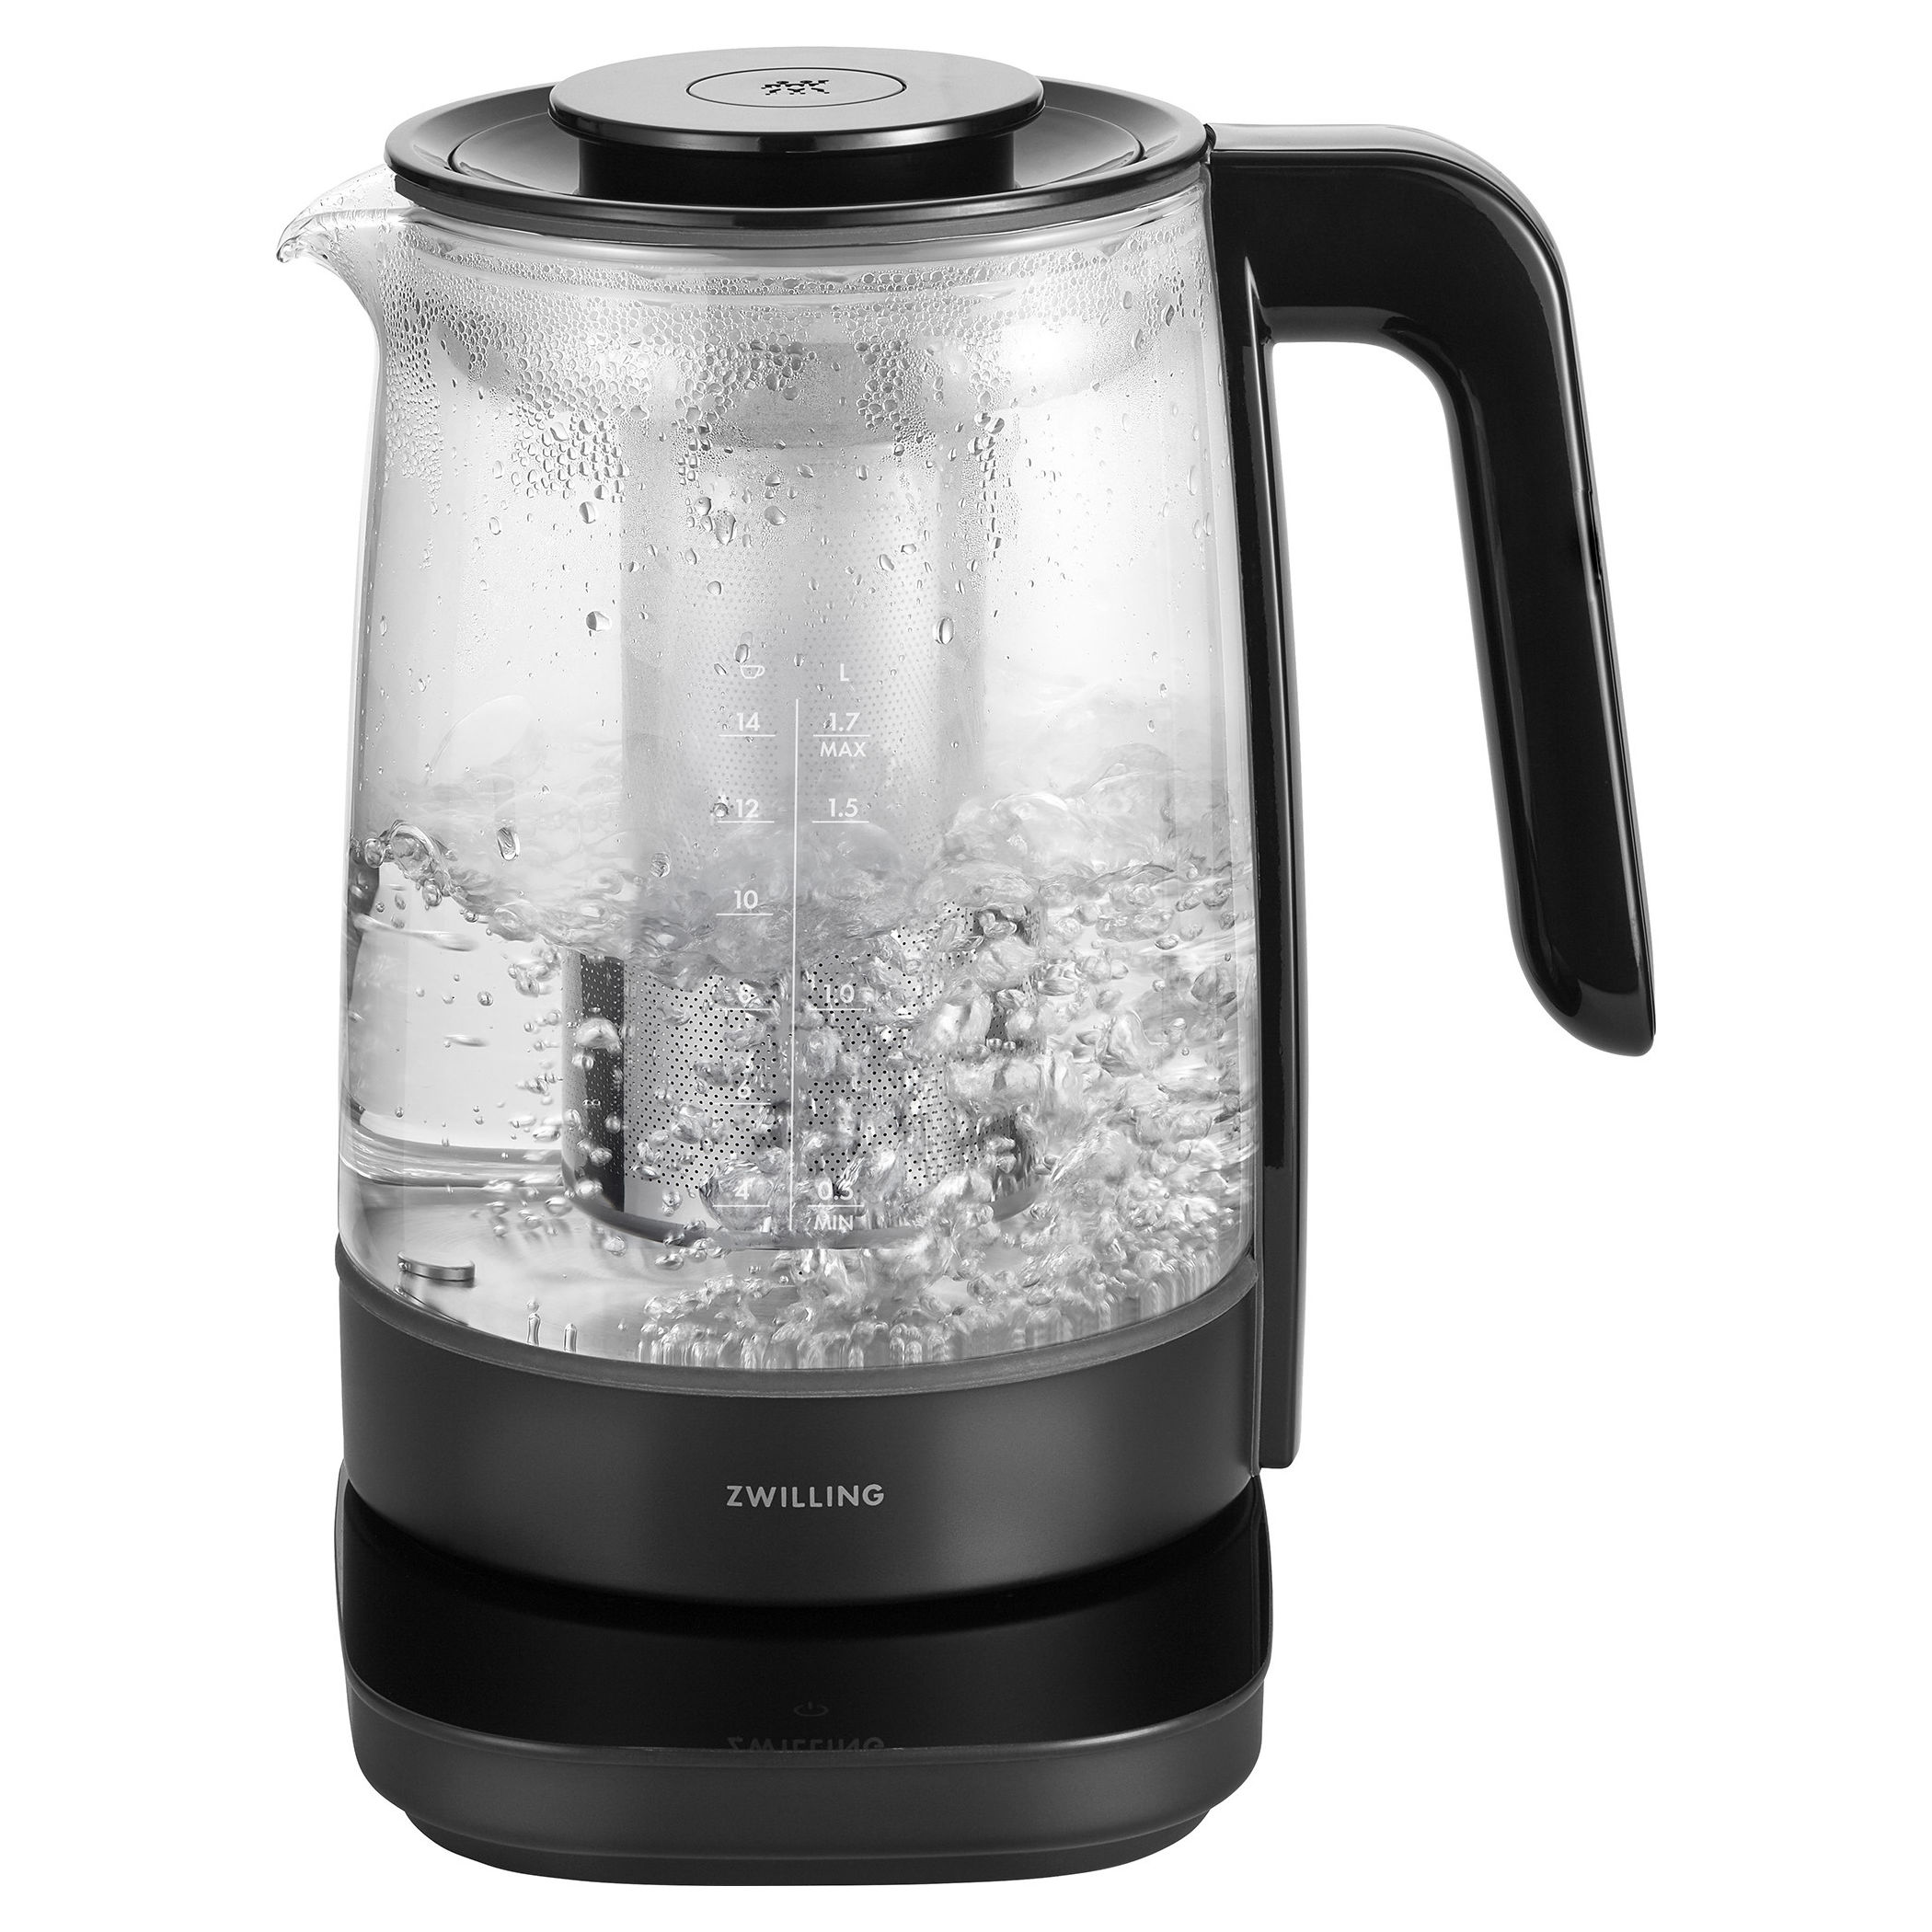 Bella Ceramic Electric Kettle Electric Kettle Review - Consumer